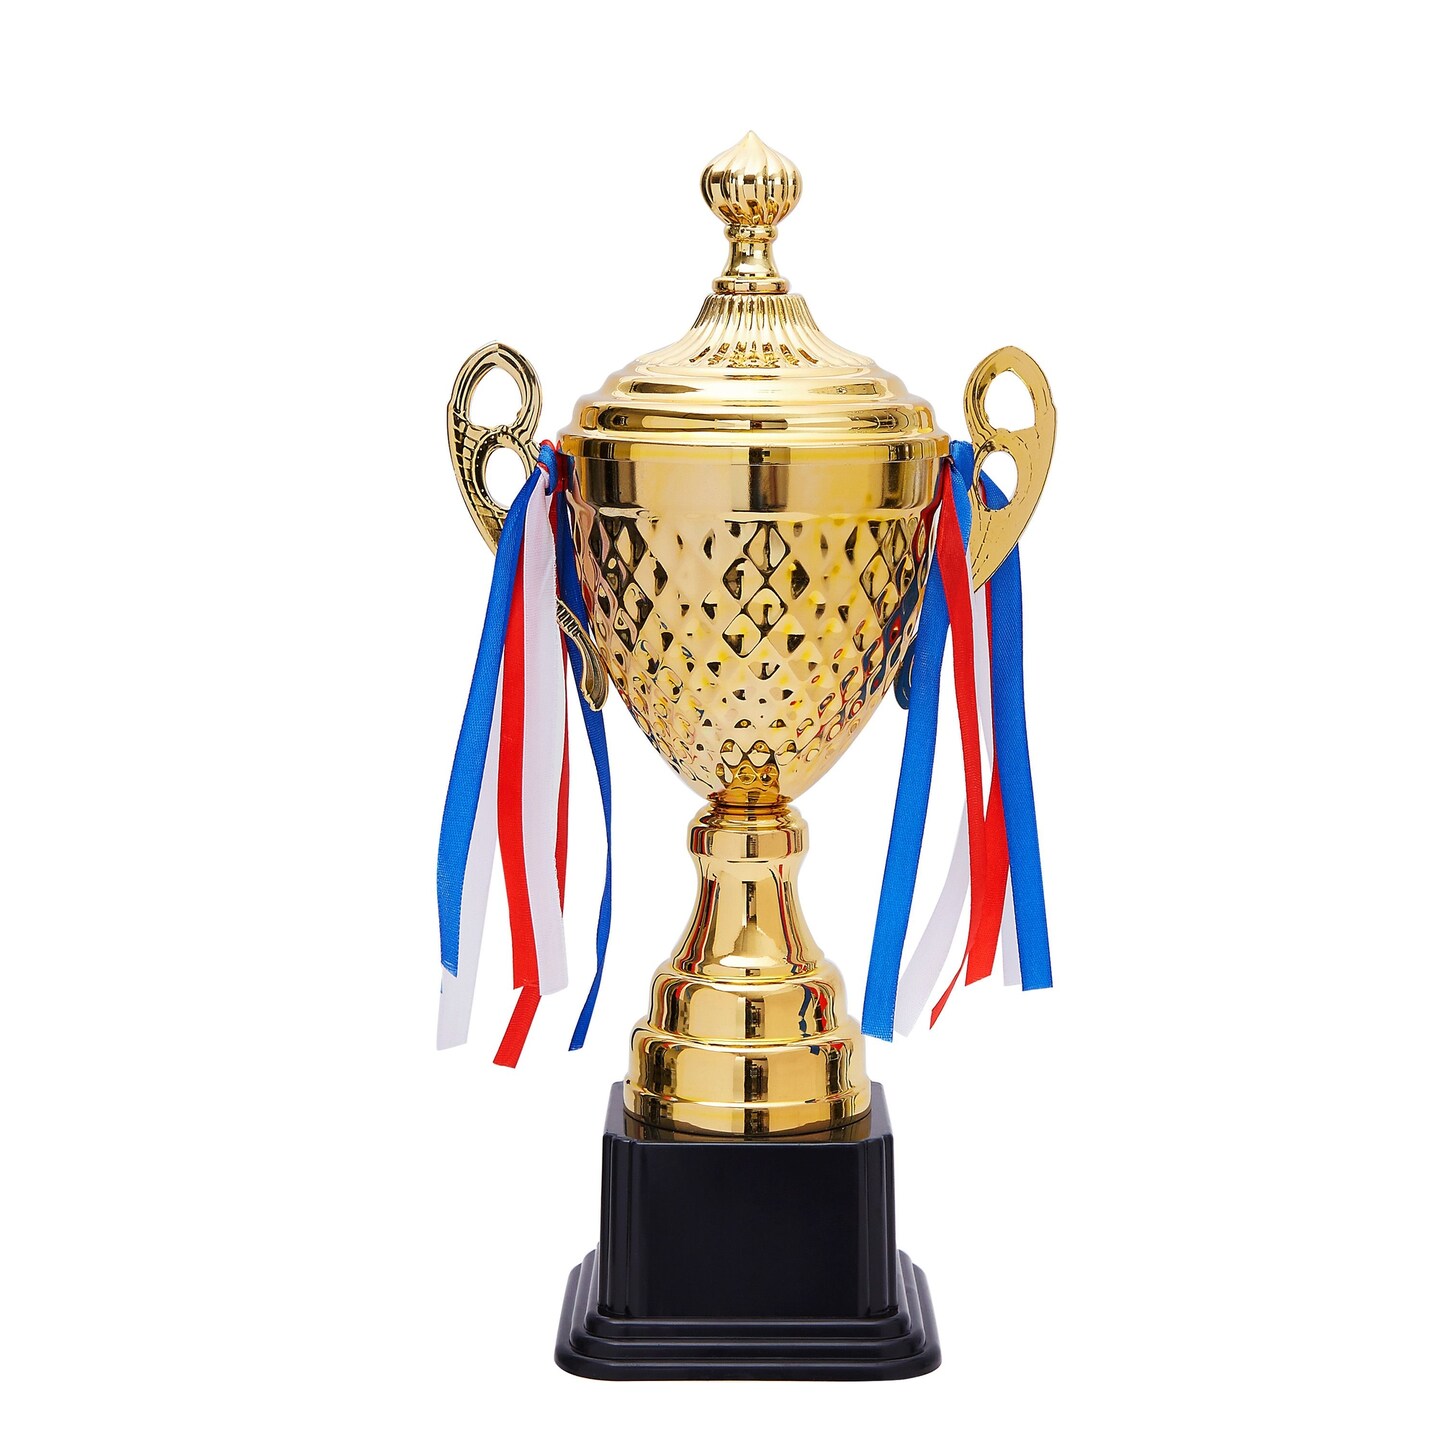 Large Gold Trophy Cup for Sports Championships, Tournaments, Award Competitions, Spelling Bee (15.2 x7.5 x 4.75 in)